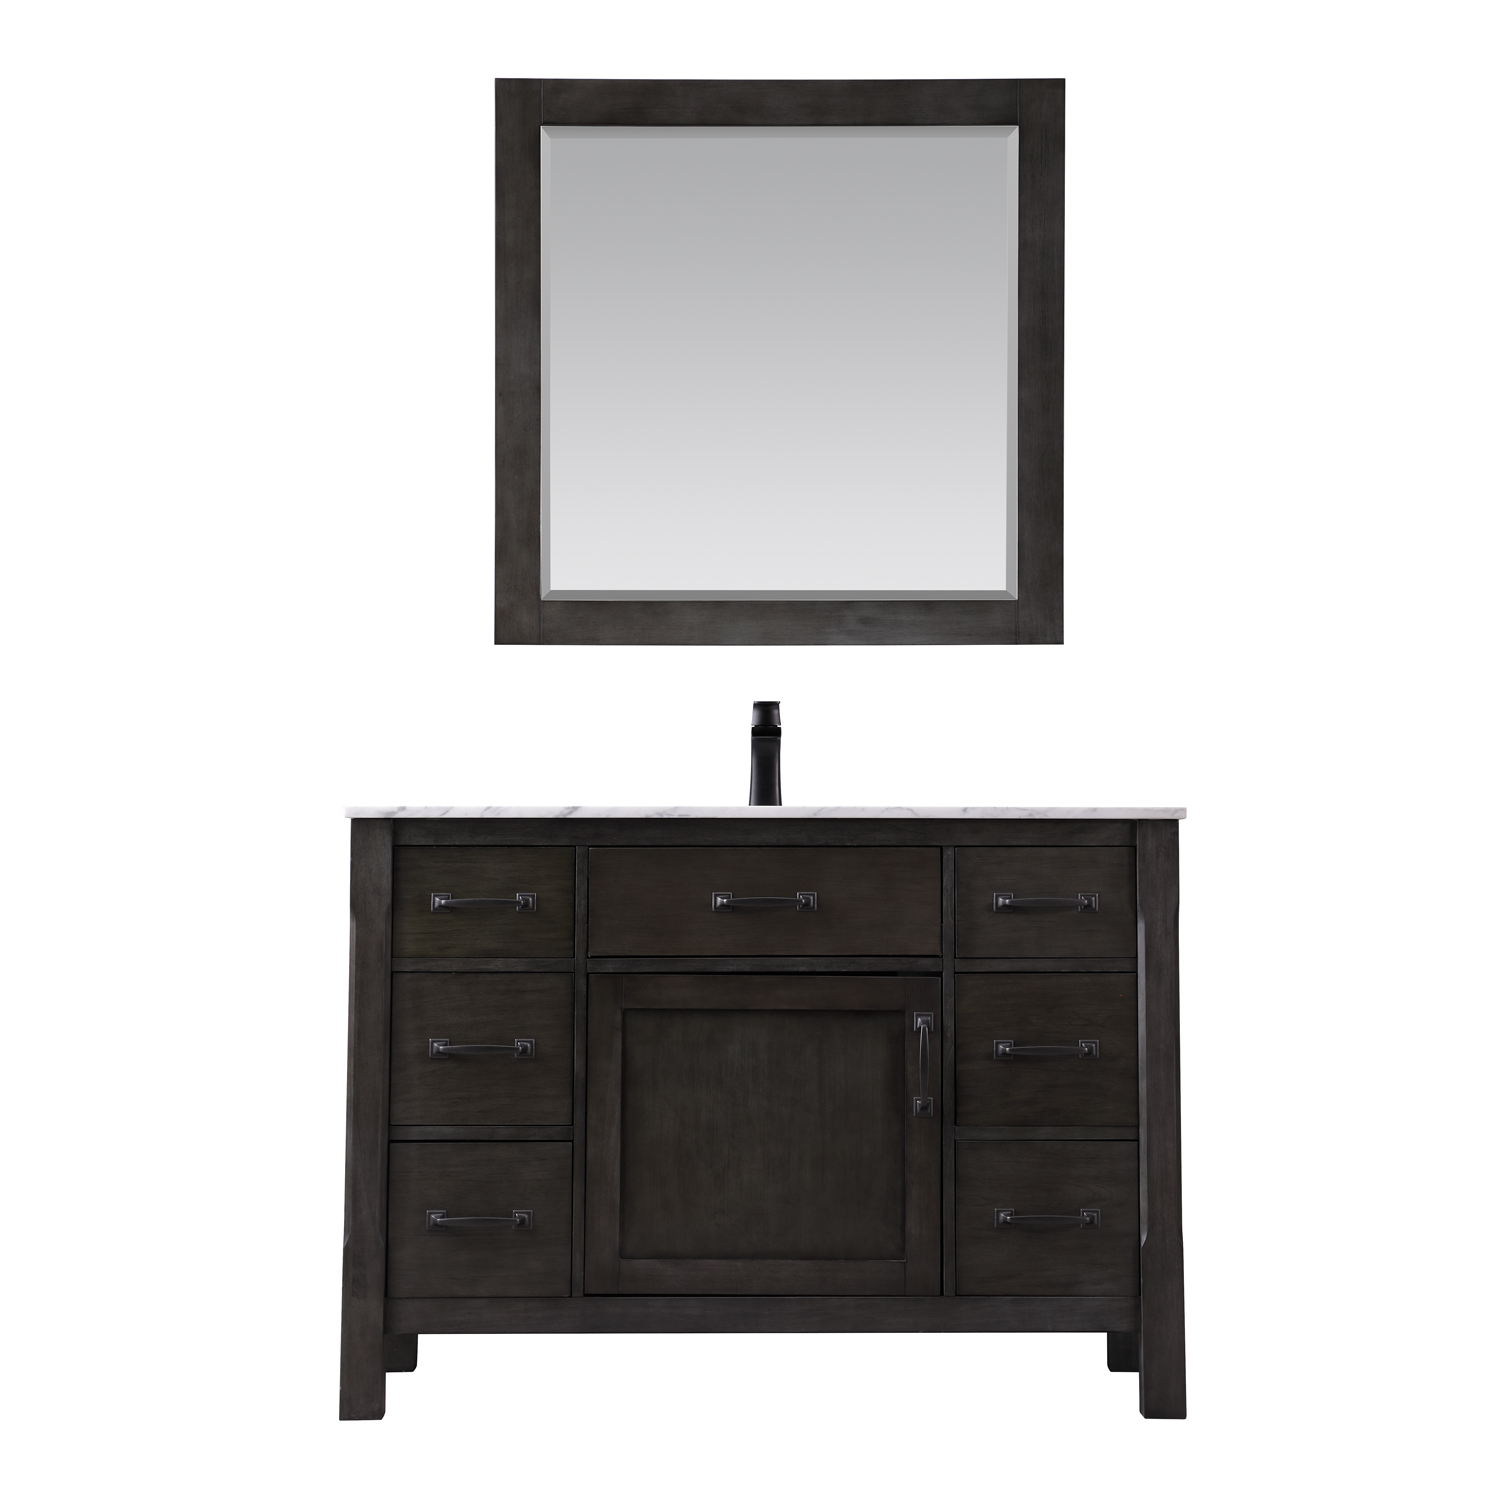 Issac Edwards Collection 48" Single Bathroom Vanity Set in Rust Black and Carrara White Marble Countertop without Mirror